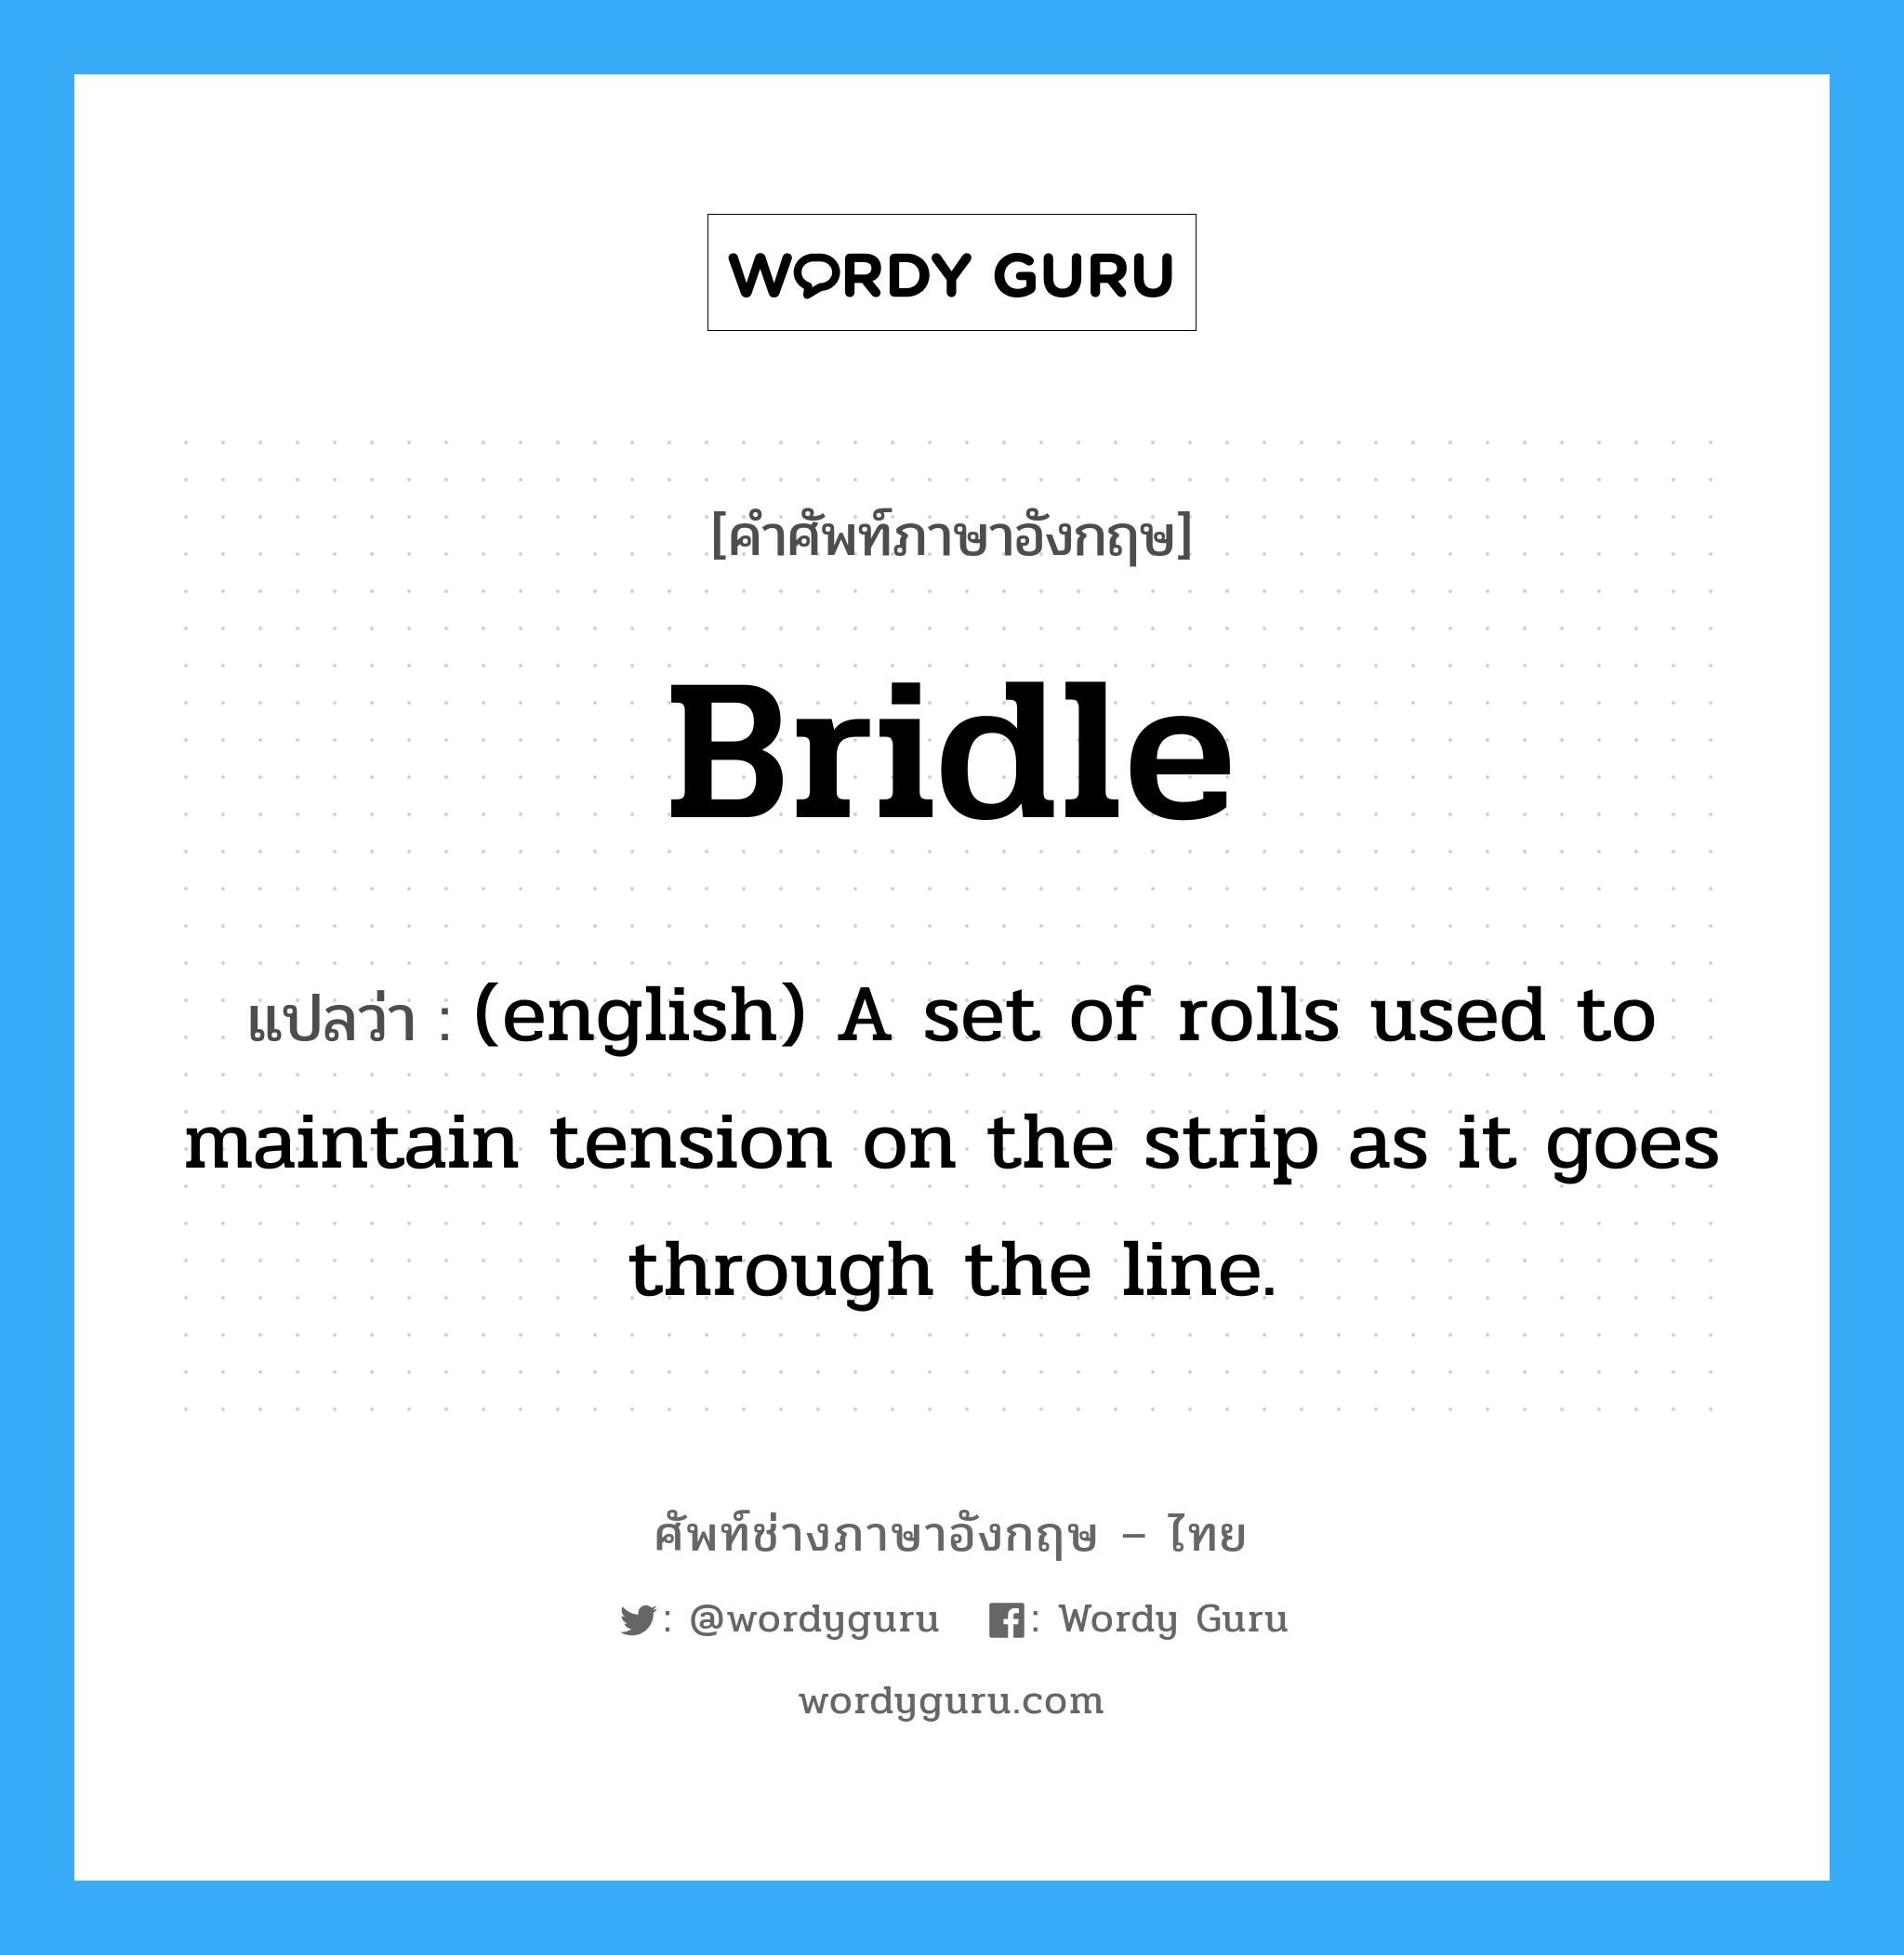 Bridle แปลว่า?, คำศัพท์ช่างภาษาอังกฤษ - ไทย Bridle คำศัพท์ภาษาอังกฤษ Bridle แปลว่า (english) A set of rolls used to maintain tension on the strip as it goes through the line.